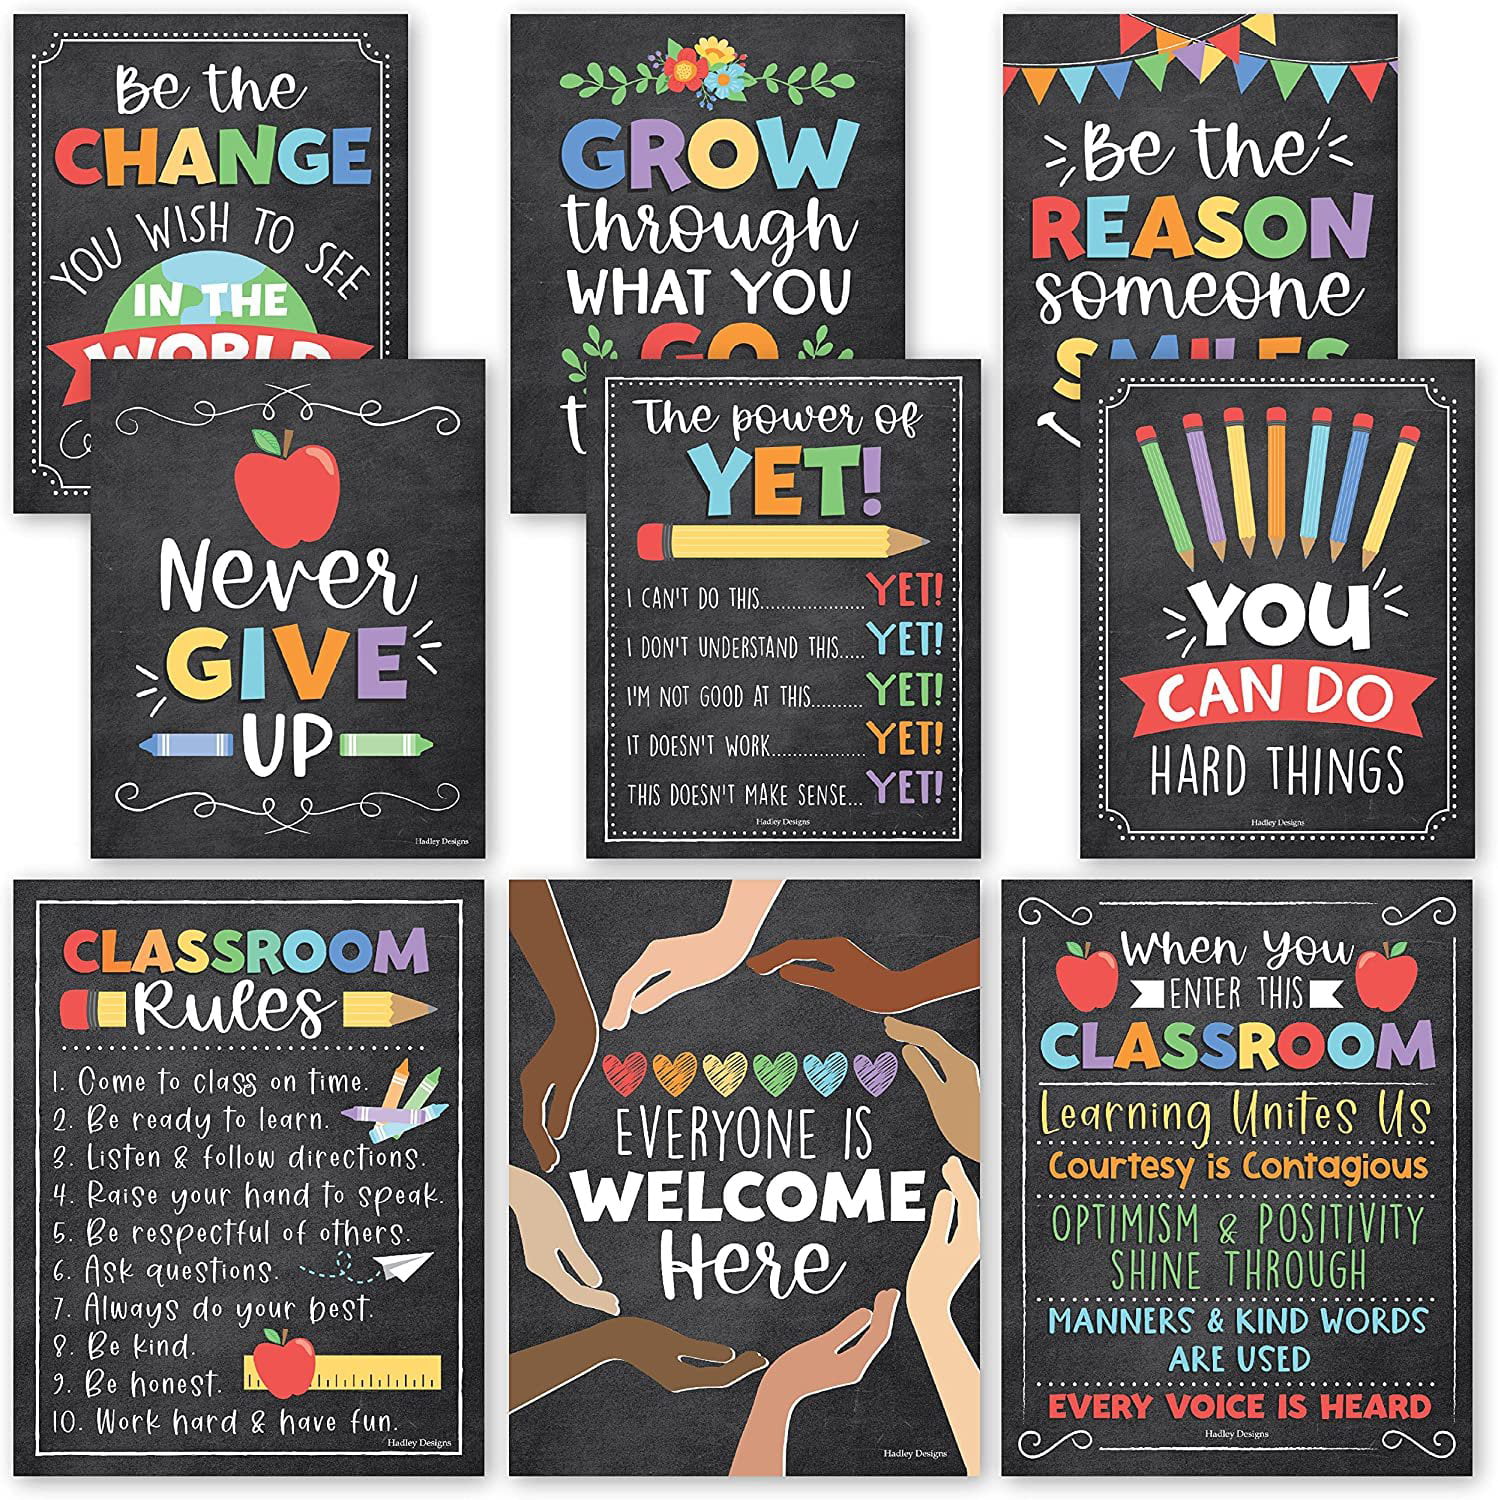 Huge blockposter to welcome students!  Welcome students, Classroom signs,  Student